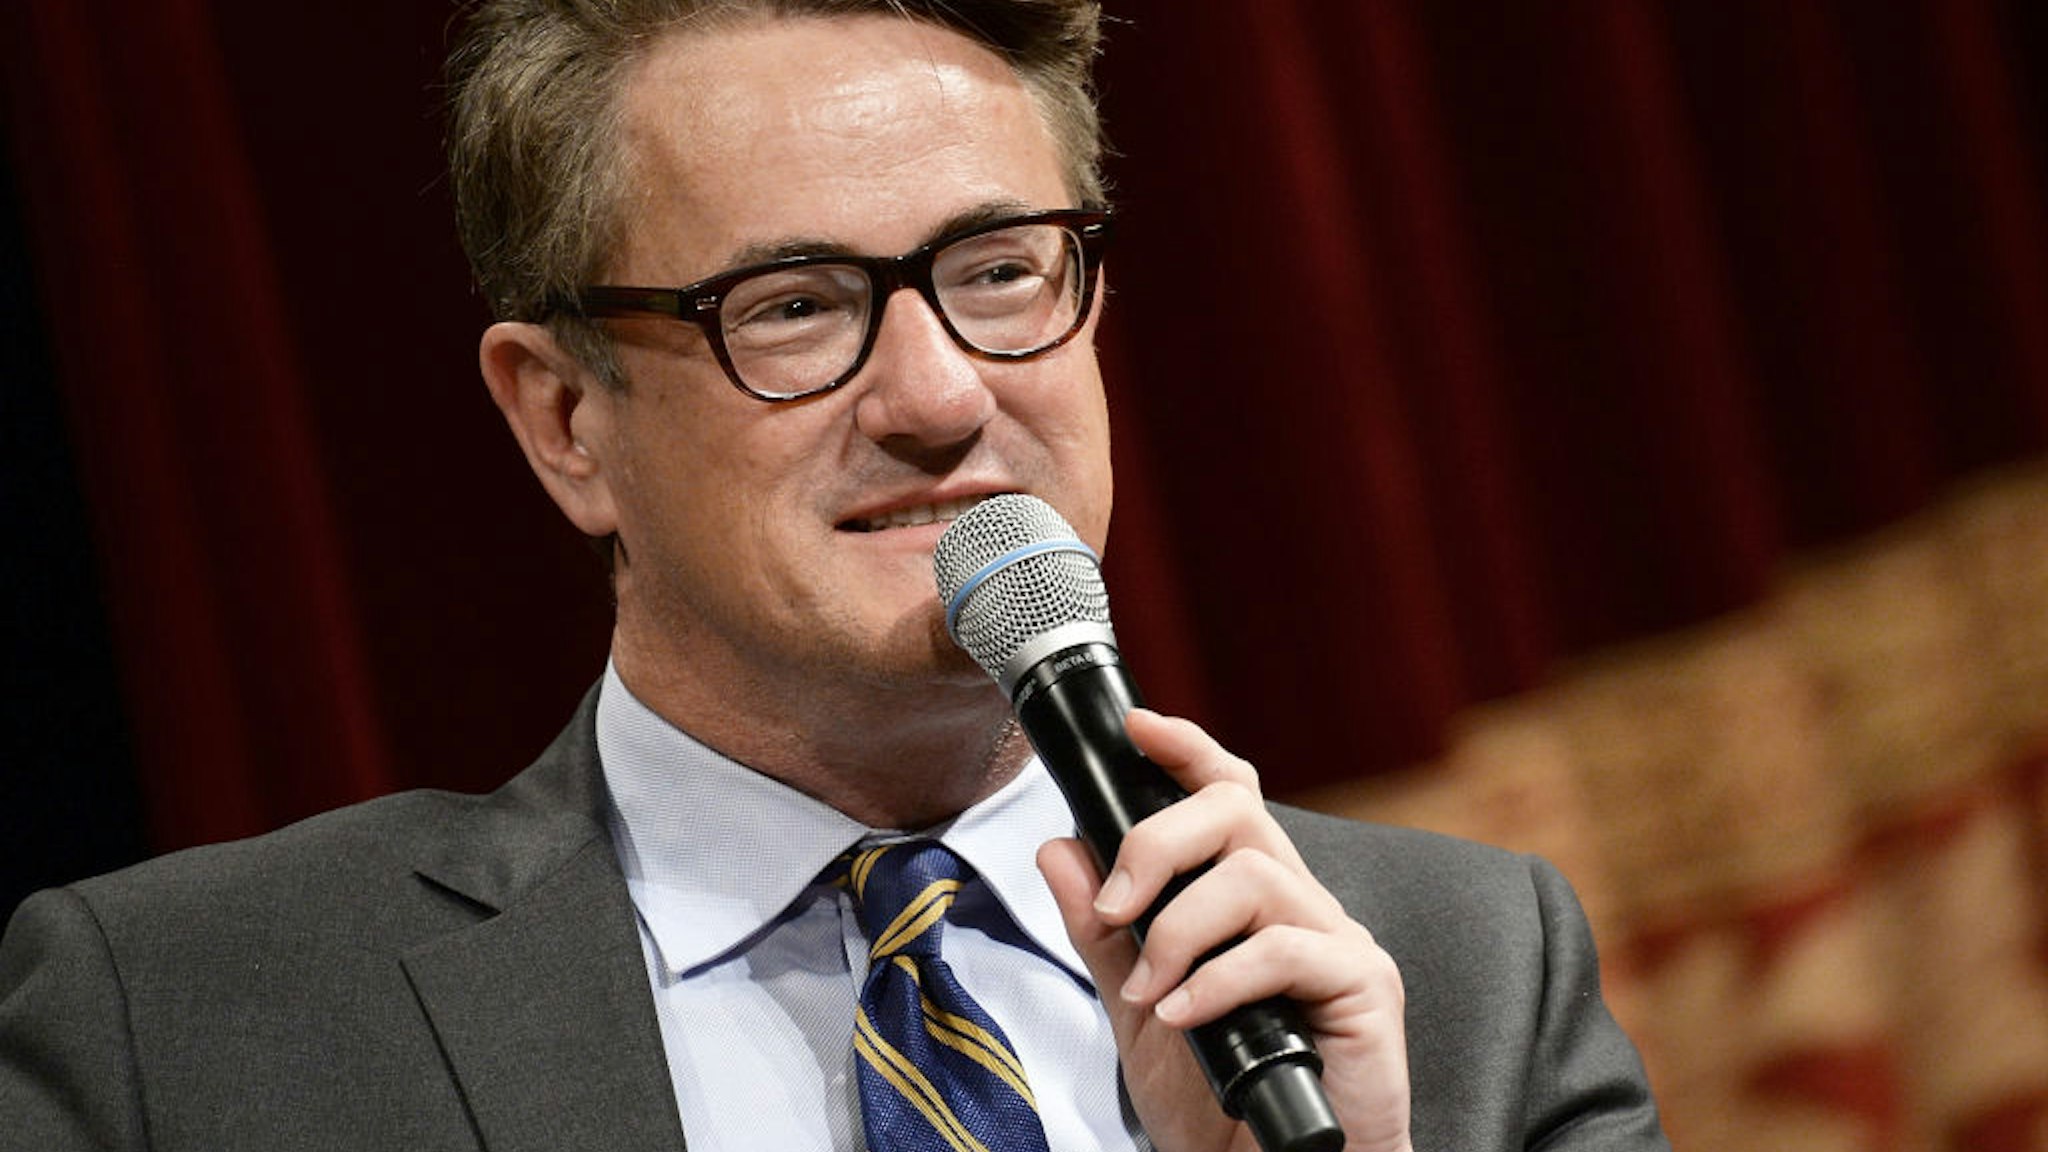 WASHINGTON, DC - JULY 12: Joe Scarborough takes part in "The David Rubenstein Show: Peer-To-Peer Conversations" at The National Archives on July 12, 2017 in Washington, DC. (Photo by Shannon Finney/WireImage)